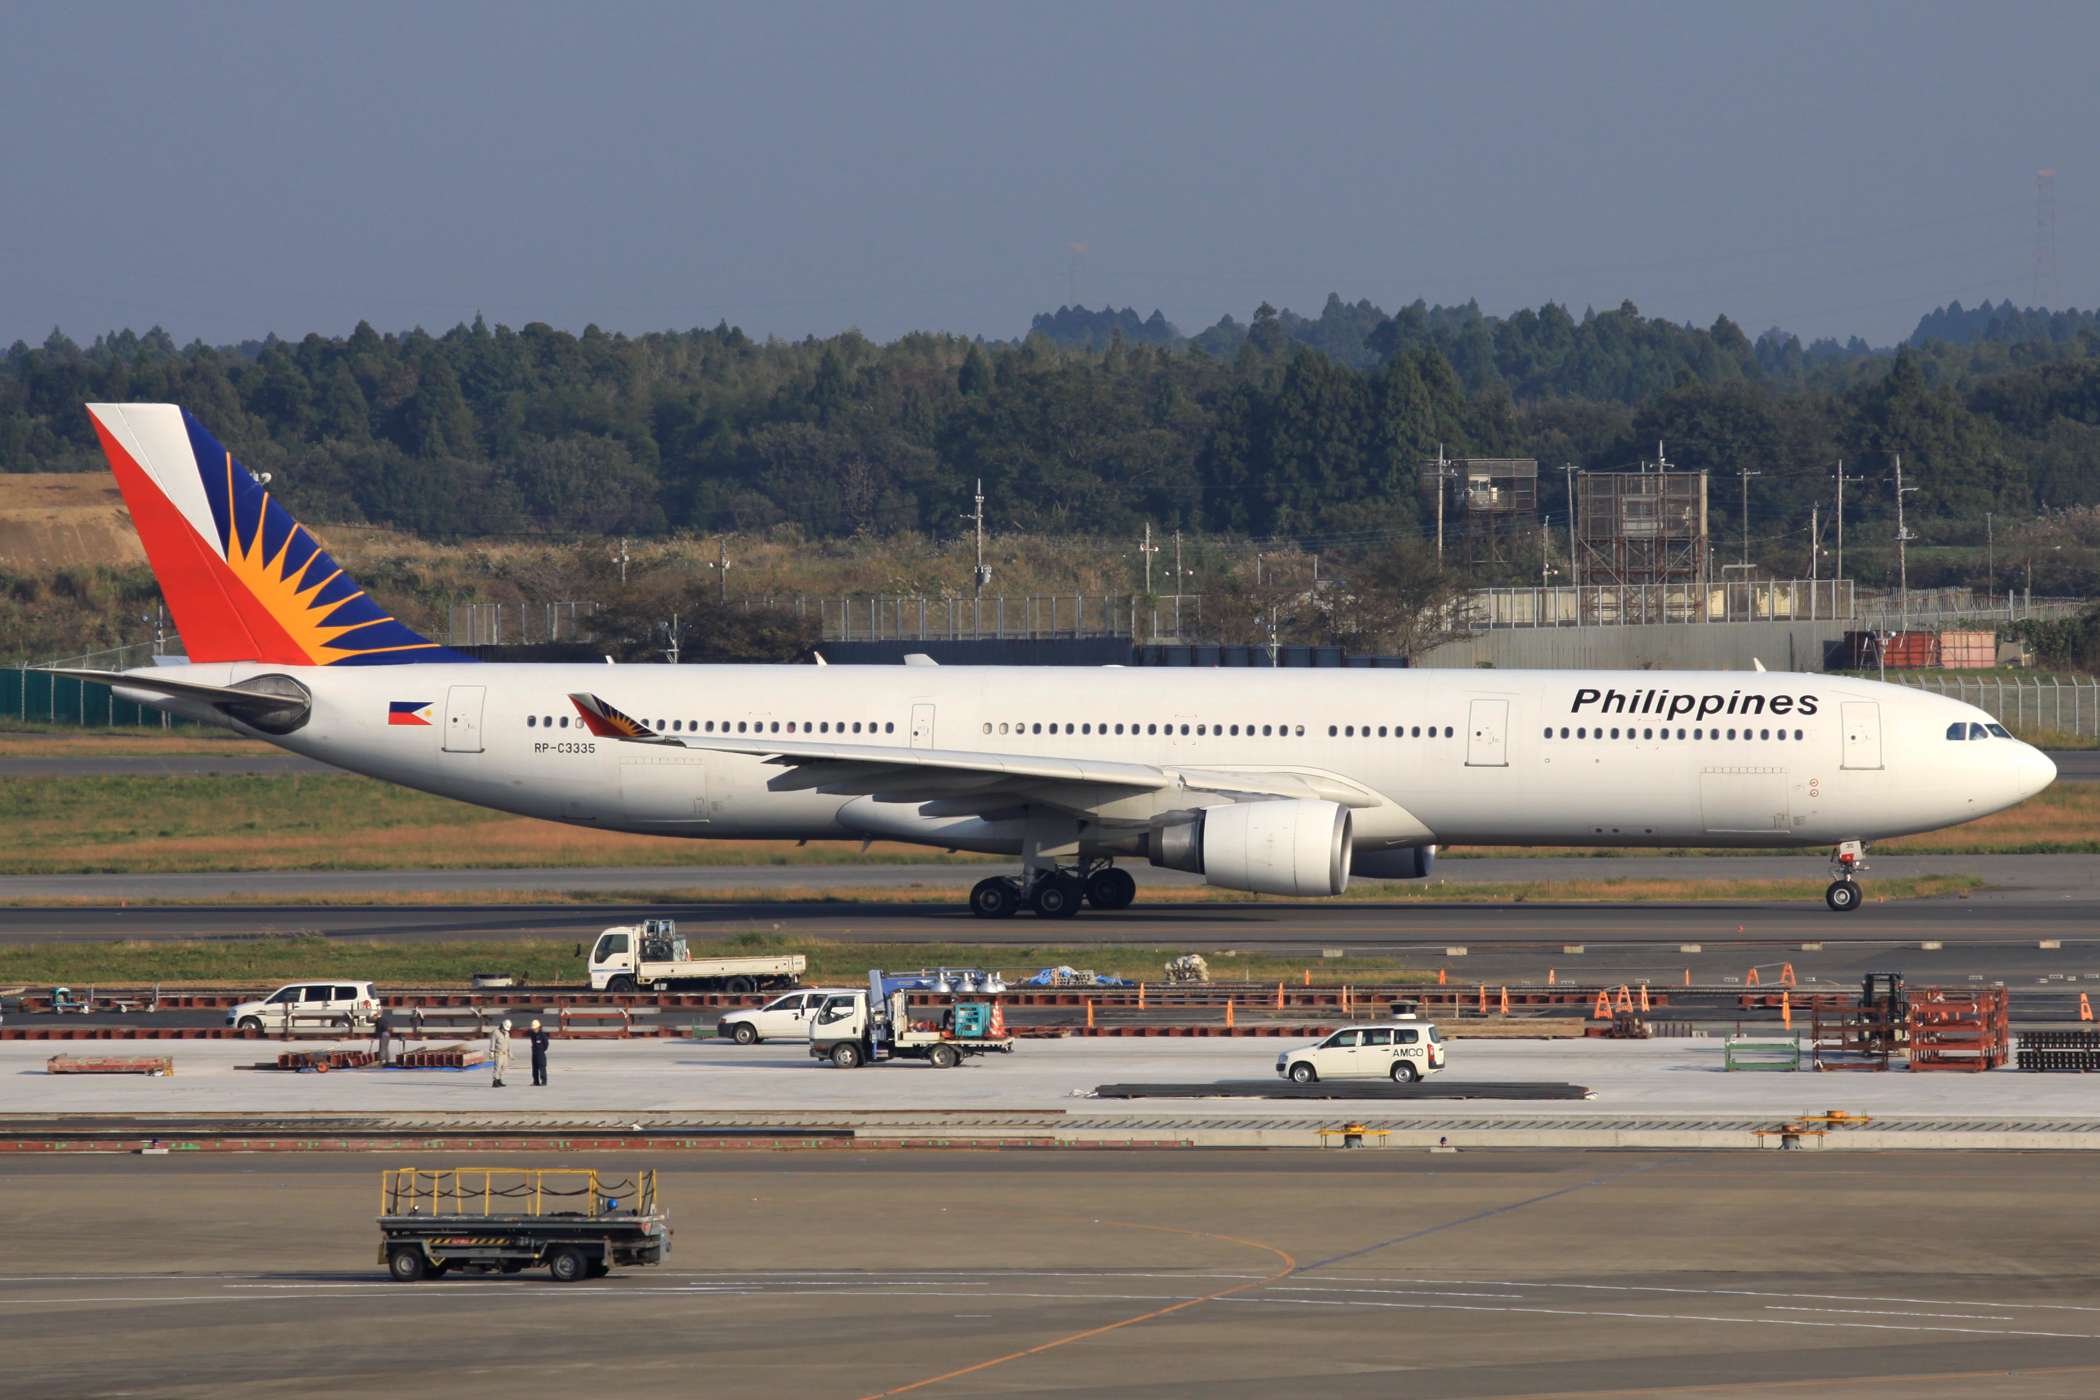 Nearly 25 Years: The Hijacking of Philippine Airlines Flight 812